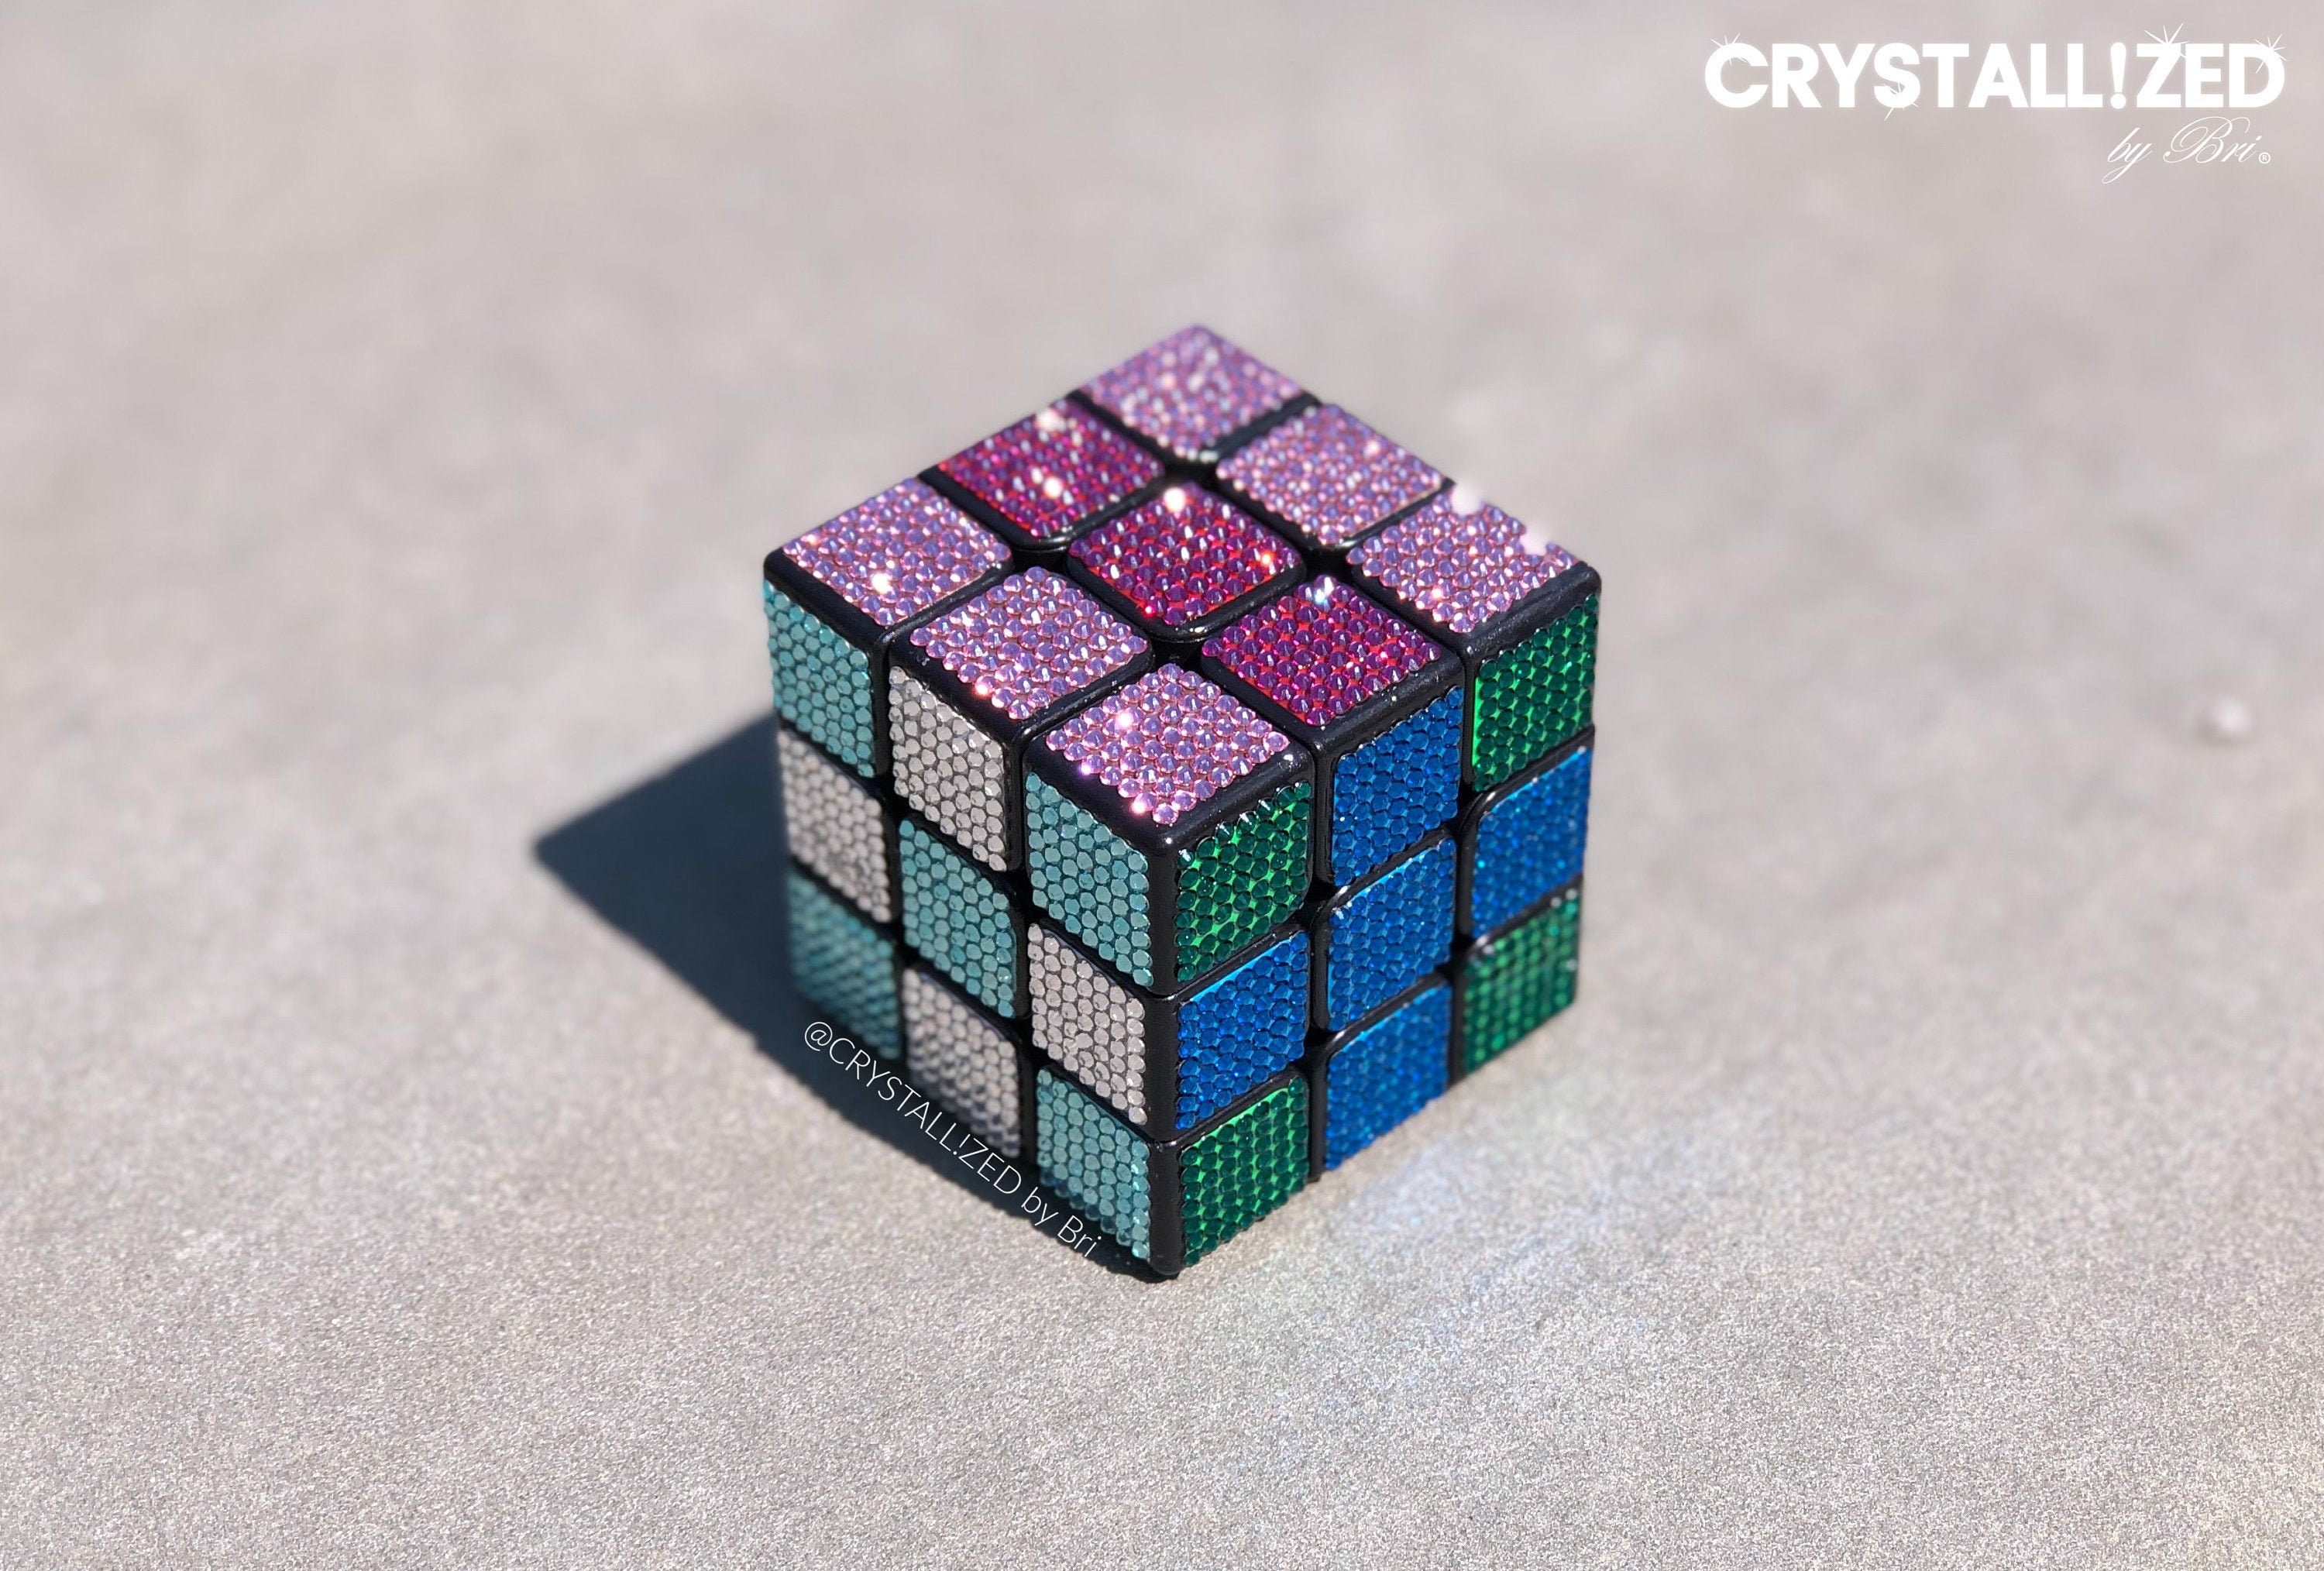 Crystal Embellished Rubiks Cube 3x3 Special Limited Crystal Edition 